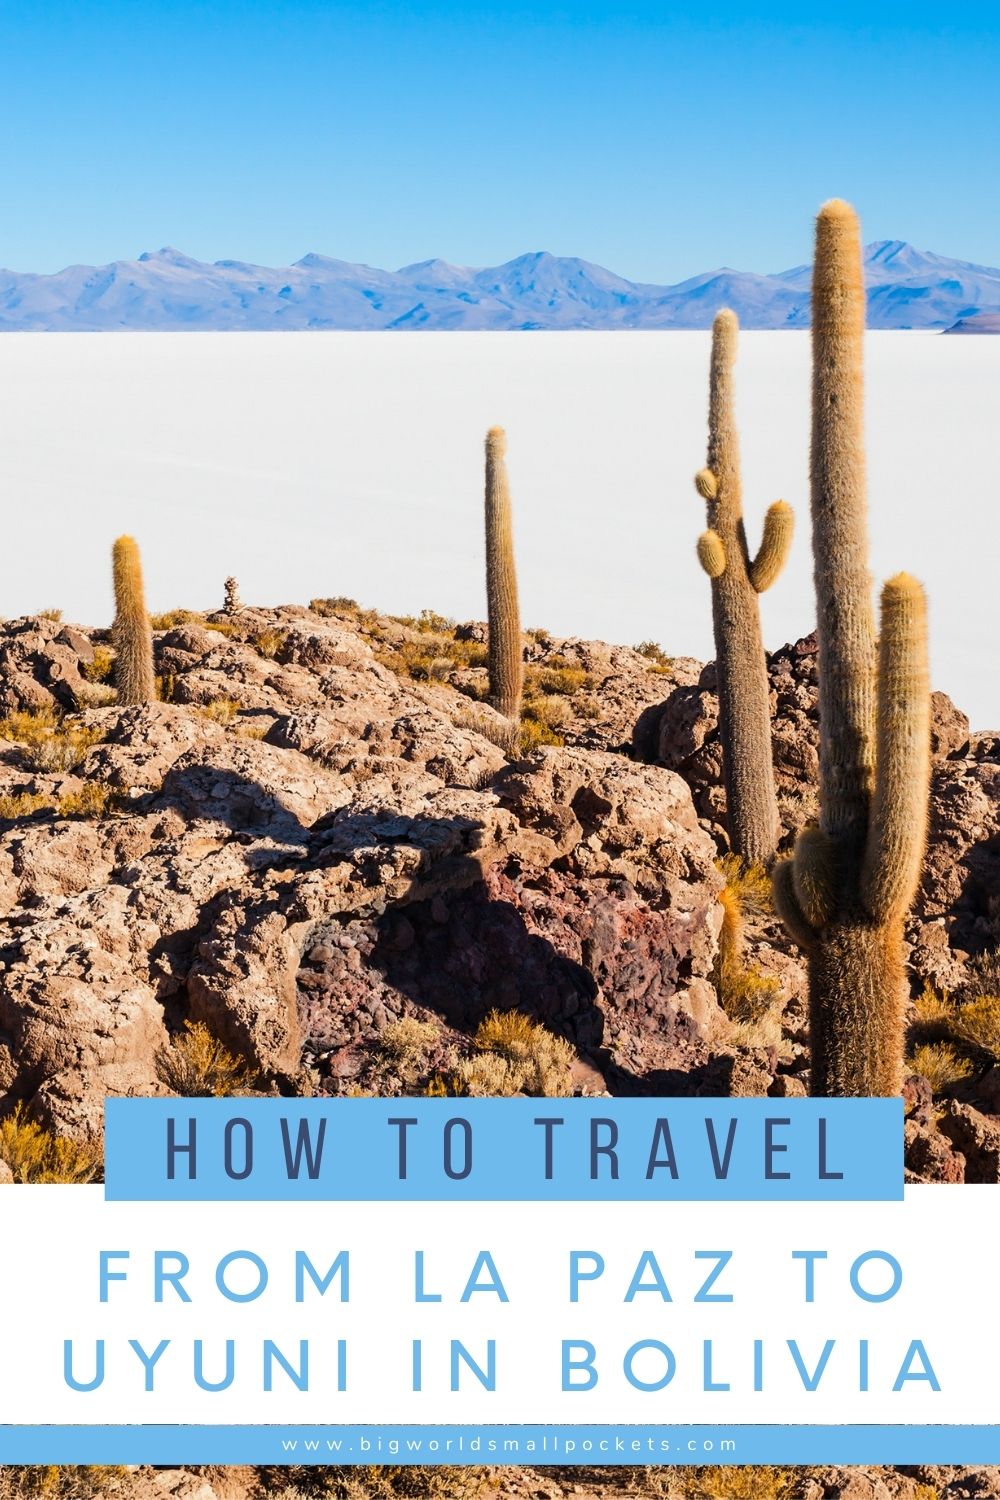 The Best Way to Travel from La Paz to Uyuni in Bolivia